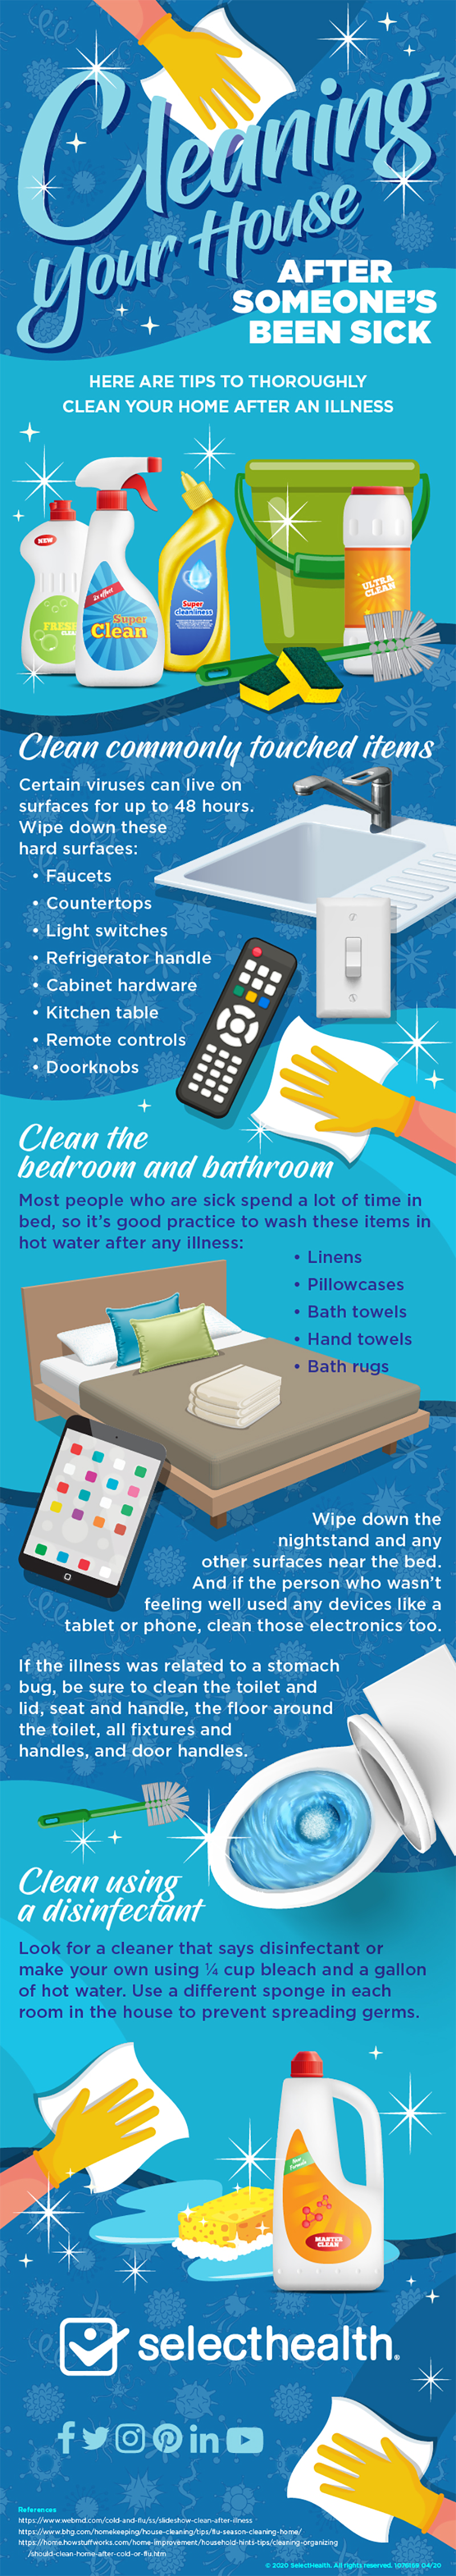 Cleaning your house after you've been sick, infographic